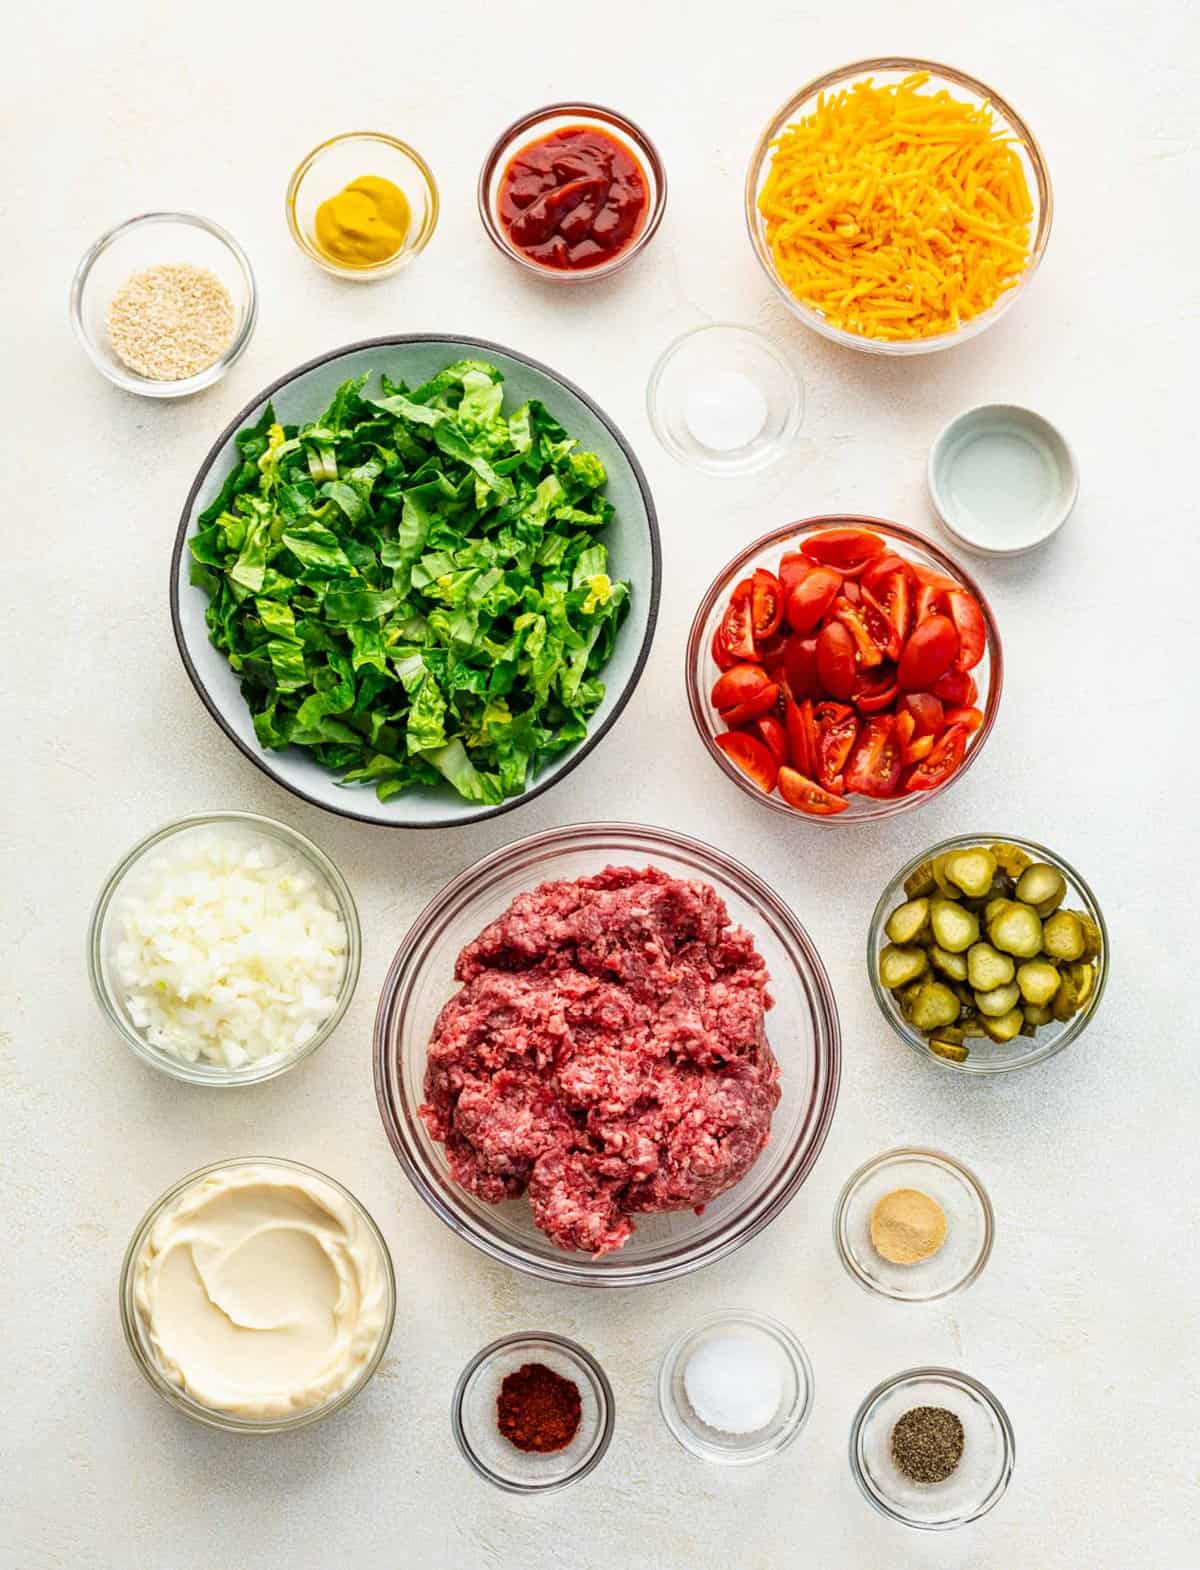 Ingredients for Big Mac salad separated into bowls.